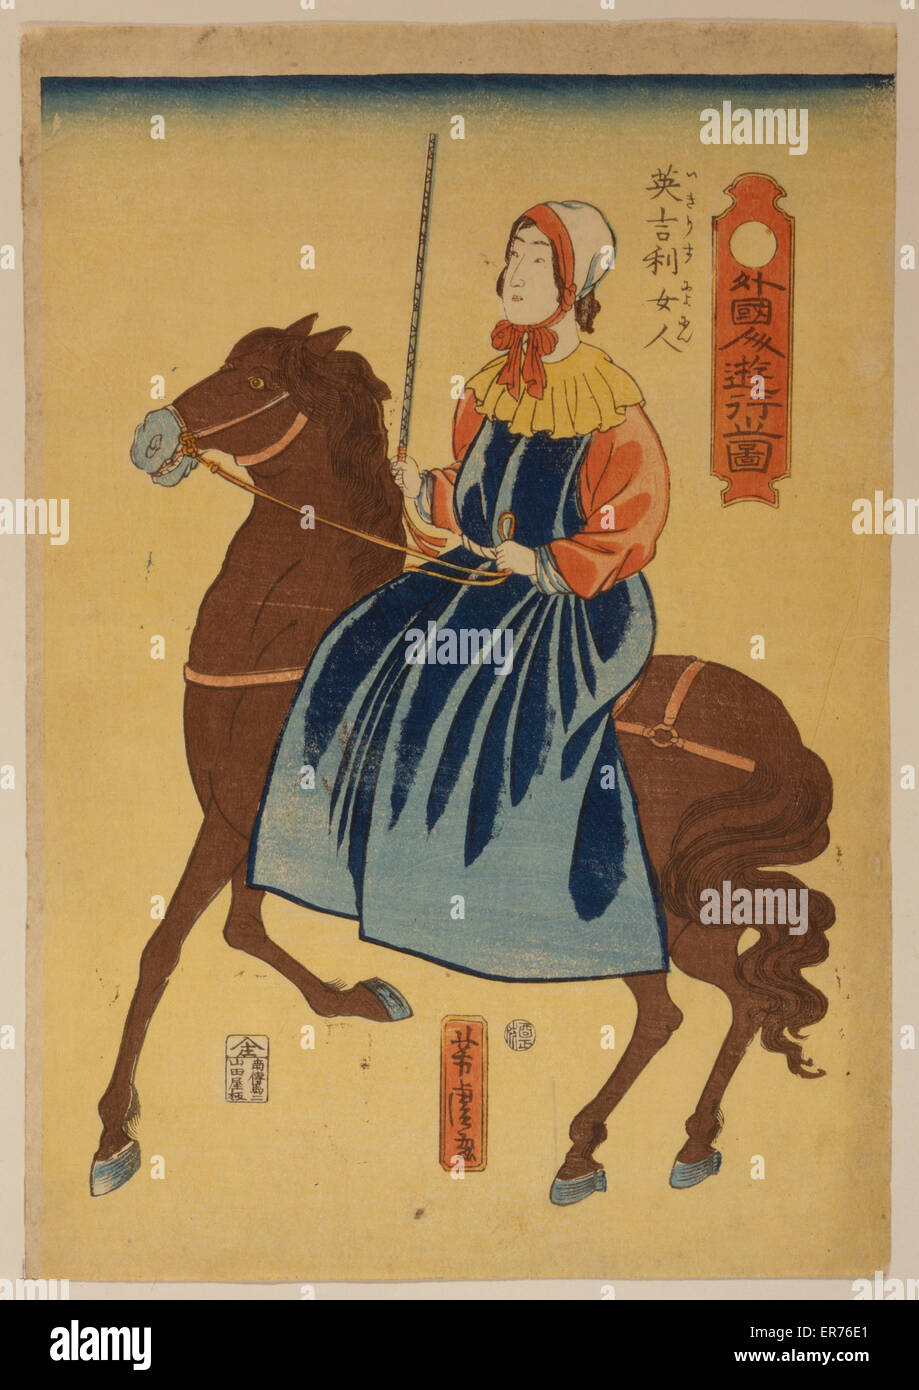 Foreigners enjoying themselves - English woman. Japanese print shows a woman riding sidesaddle. Date 1861. Stock Photo